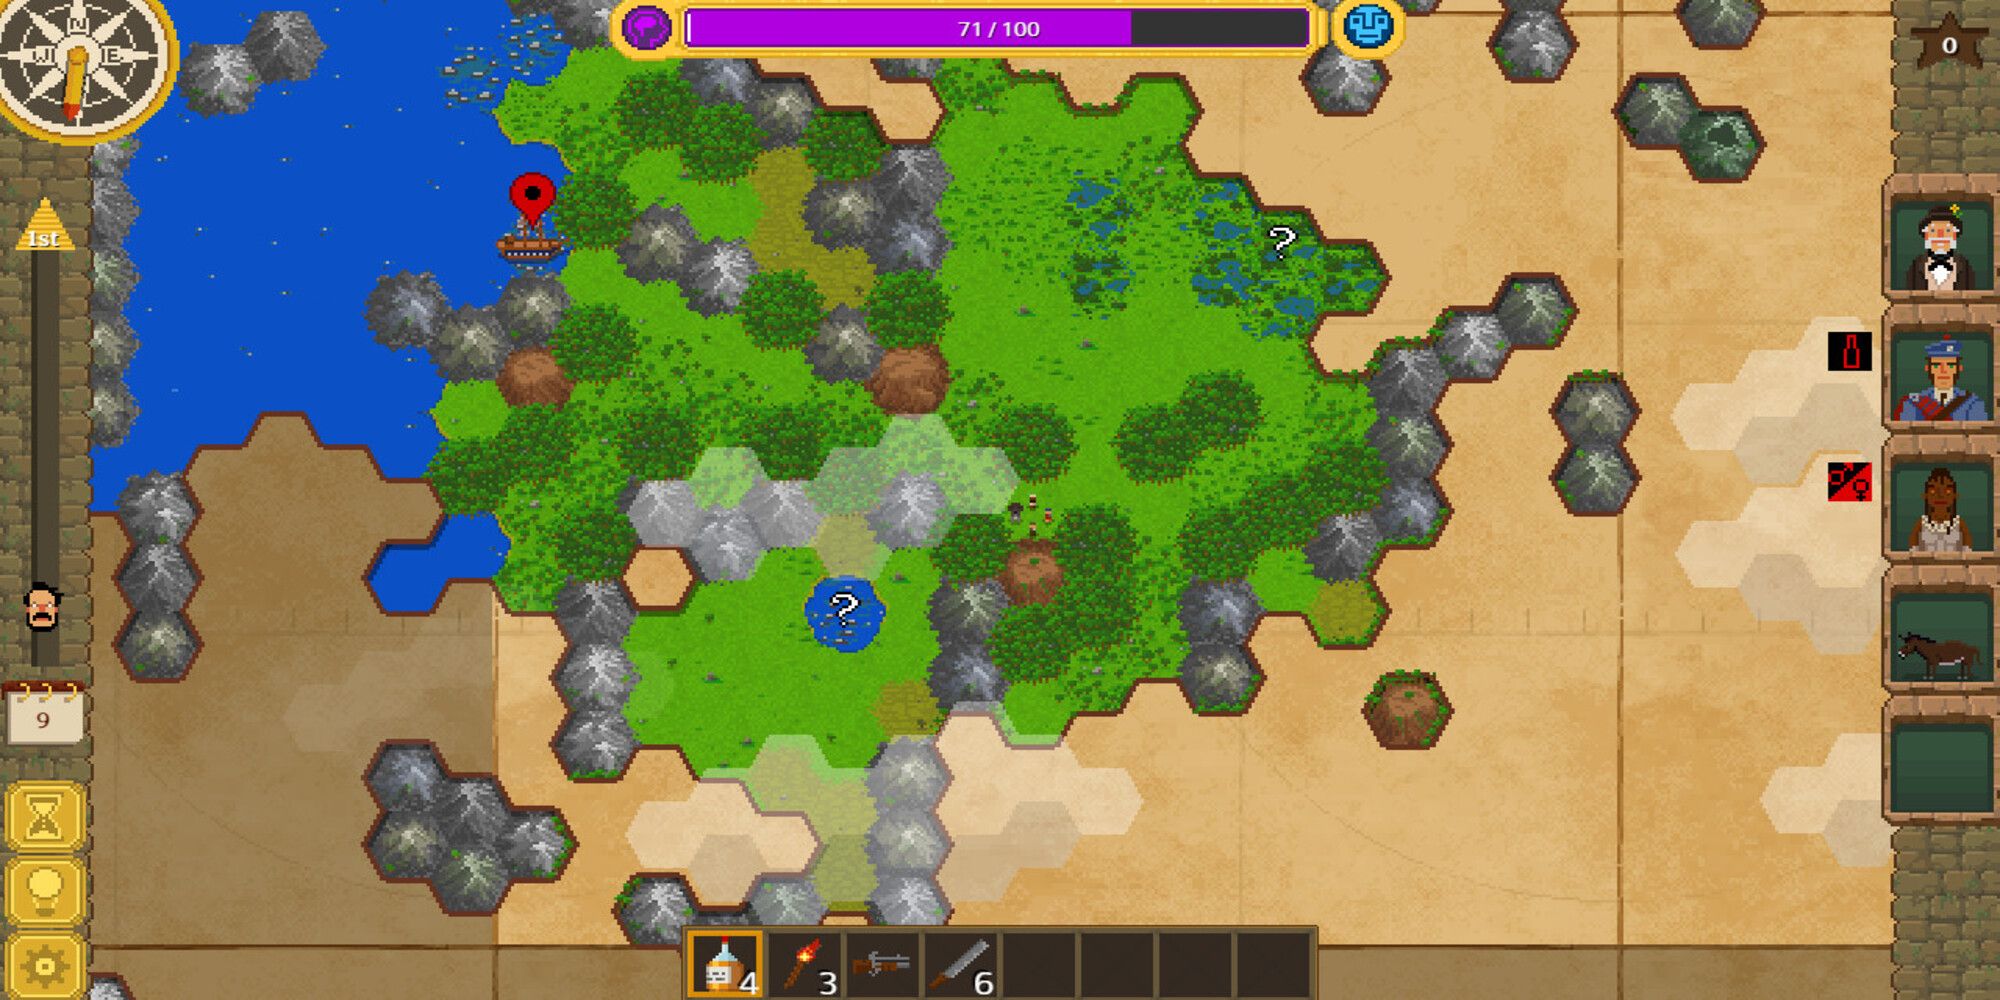 In-Game Screenshot From Curious Expedition showing the map and various tiles